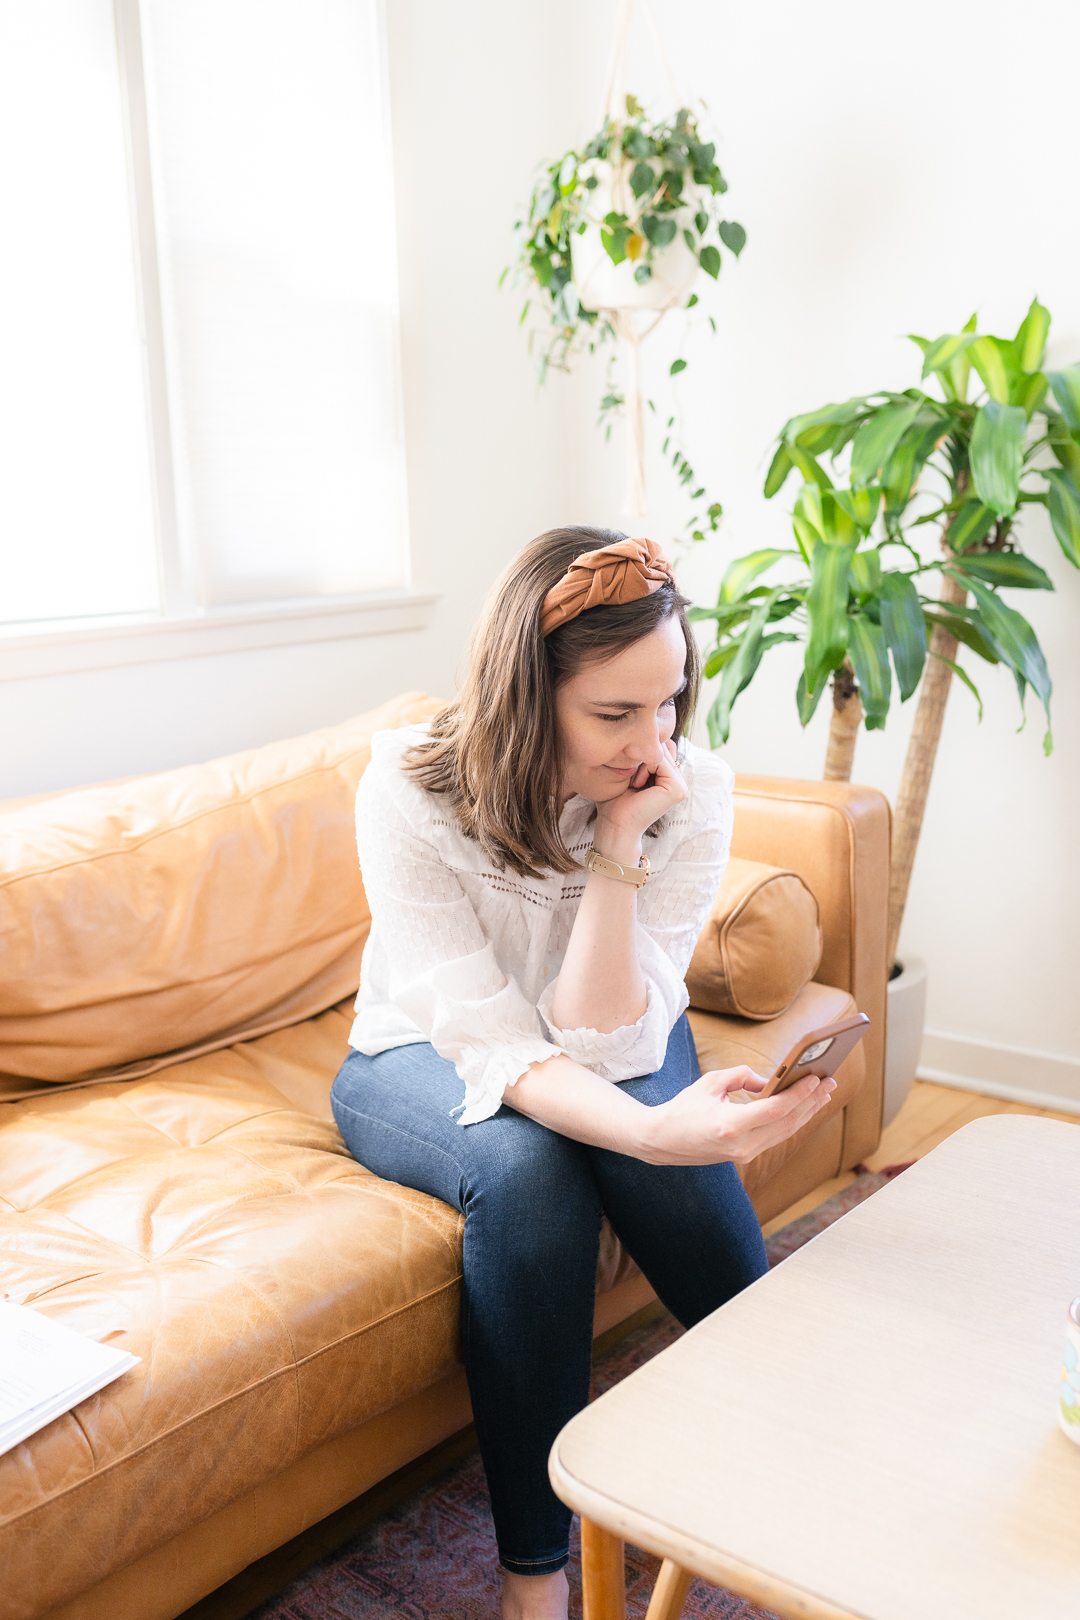 Woman sitting on couch scrolling phone